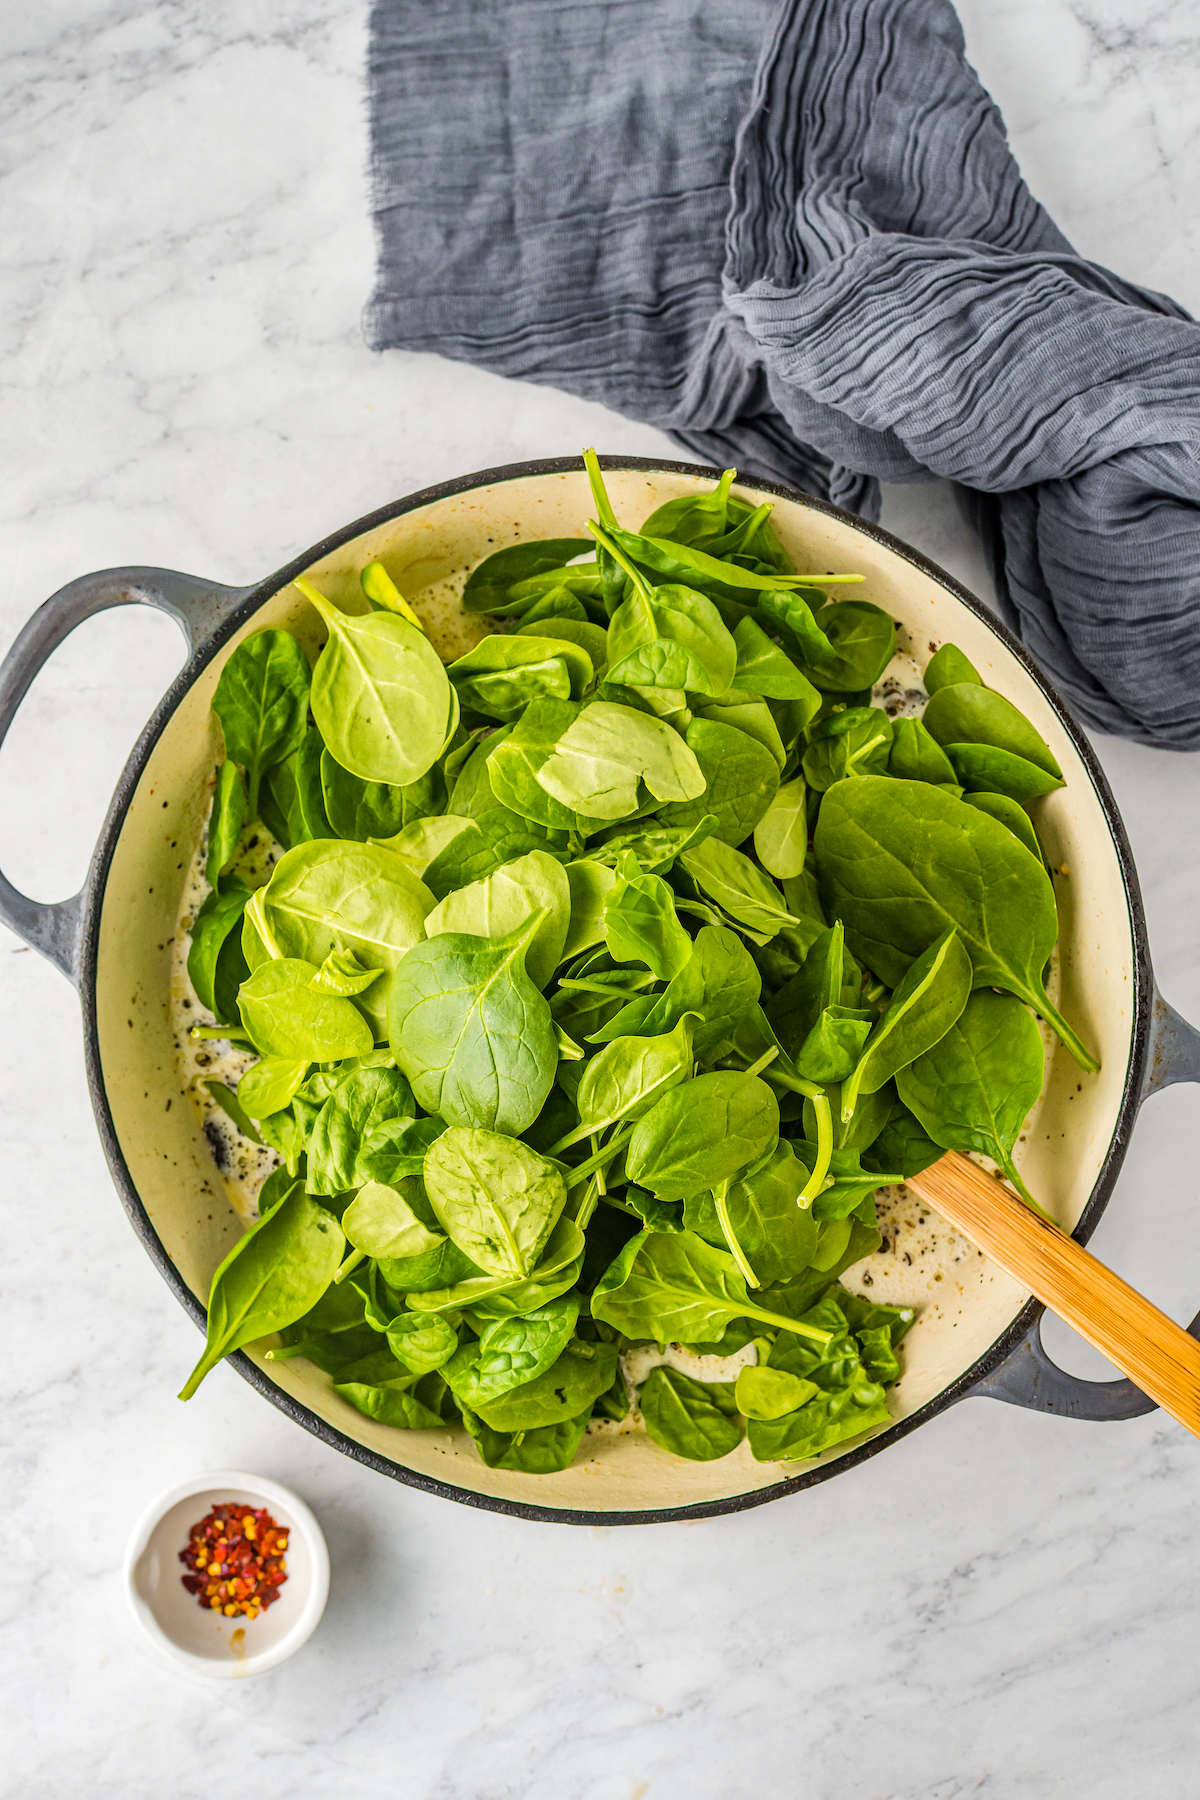 Spinach heaped into a skillet.